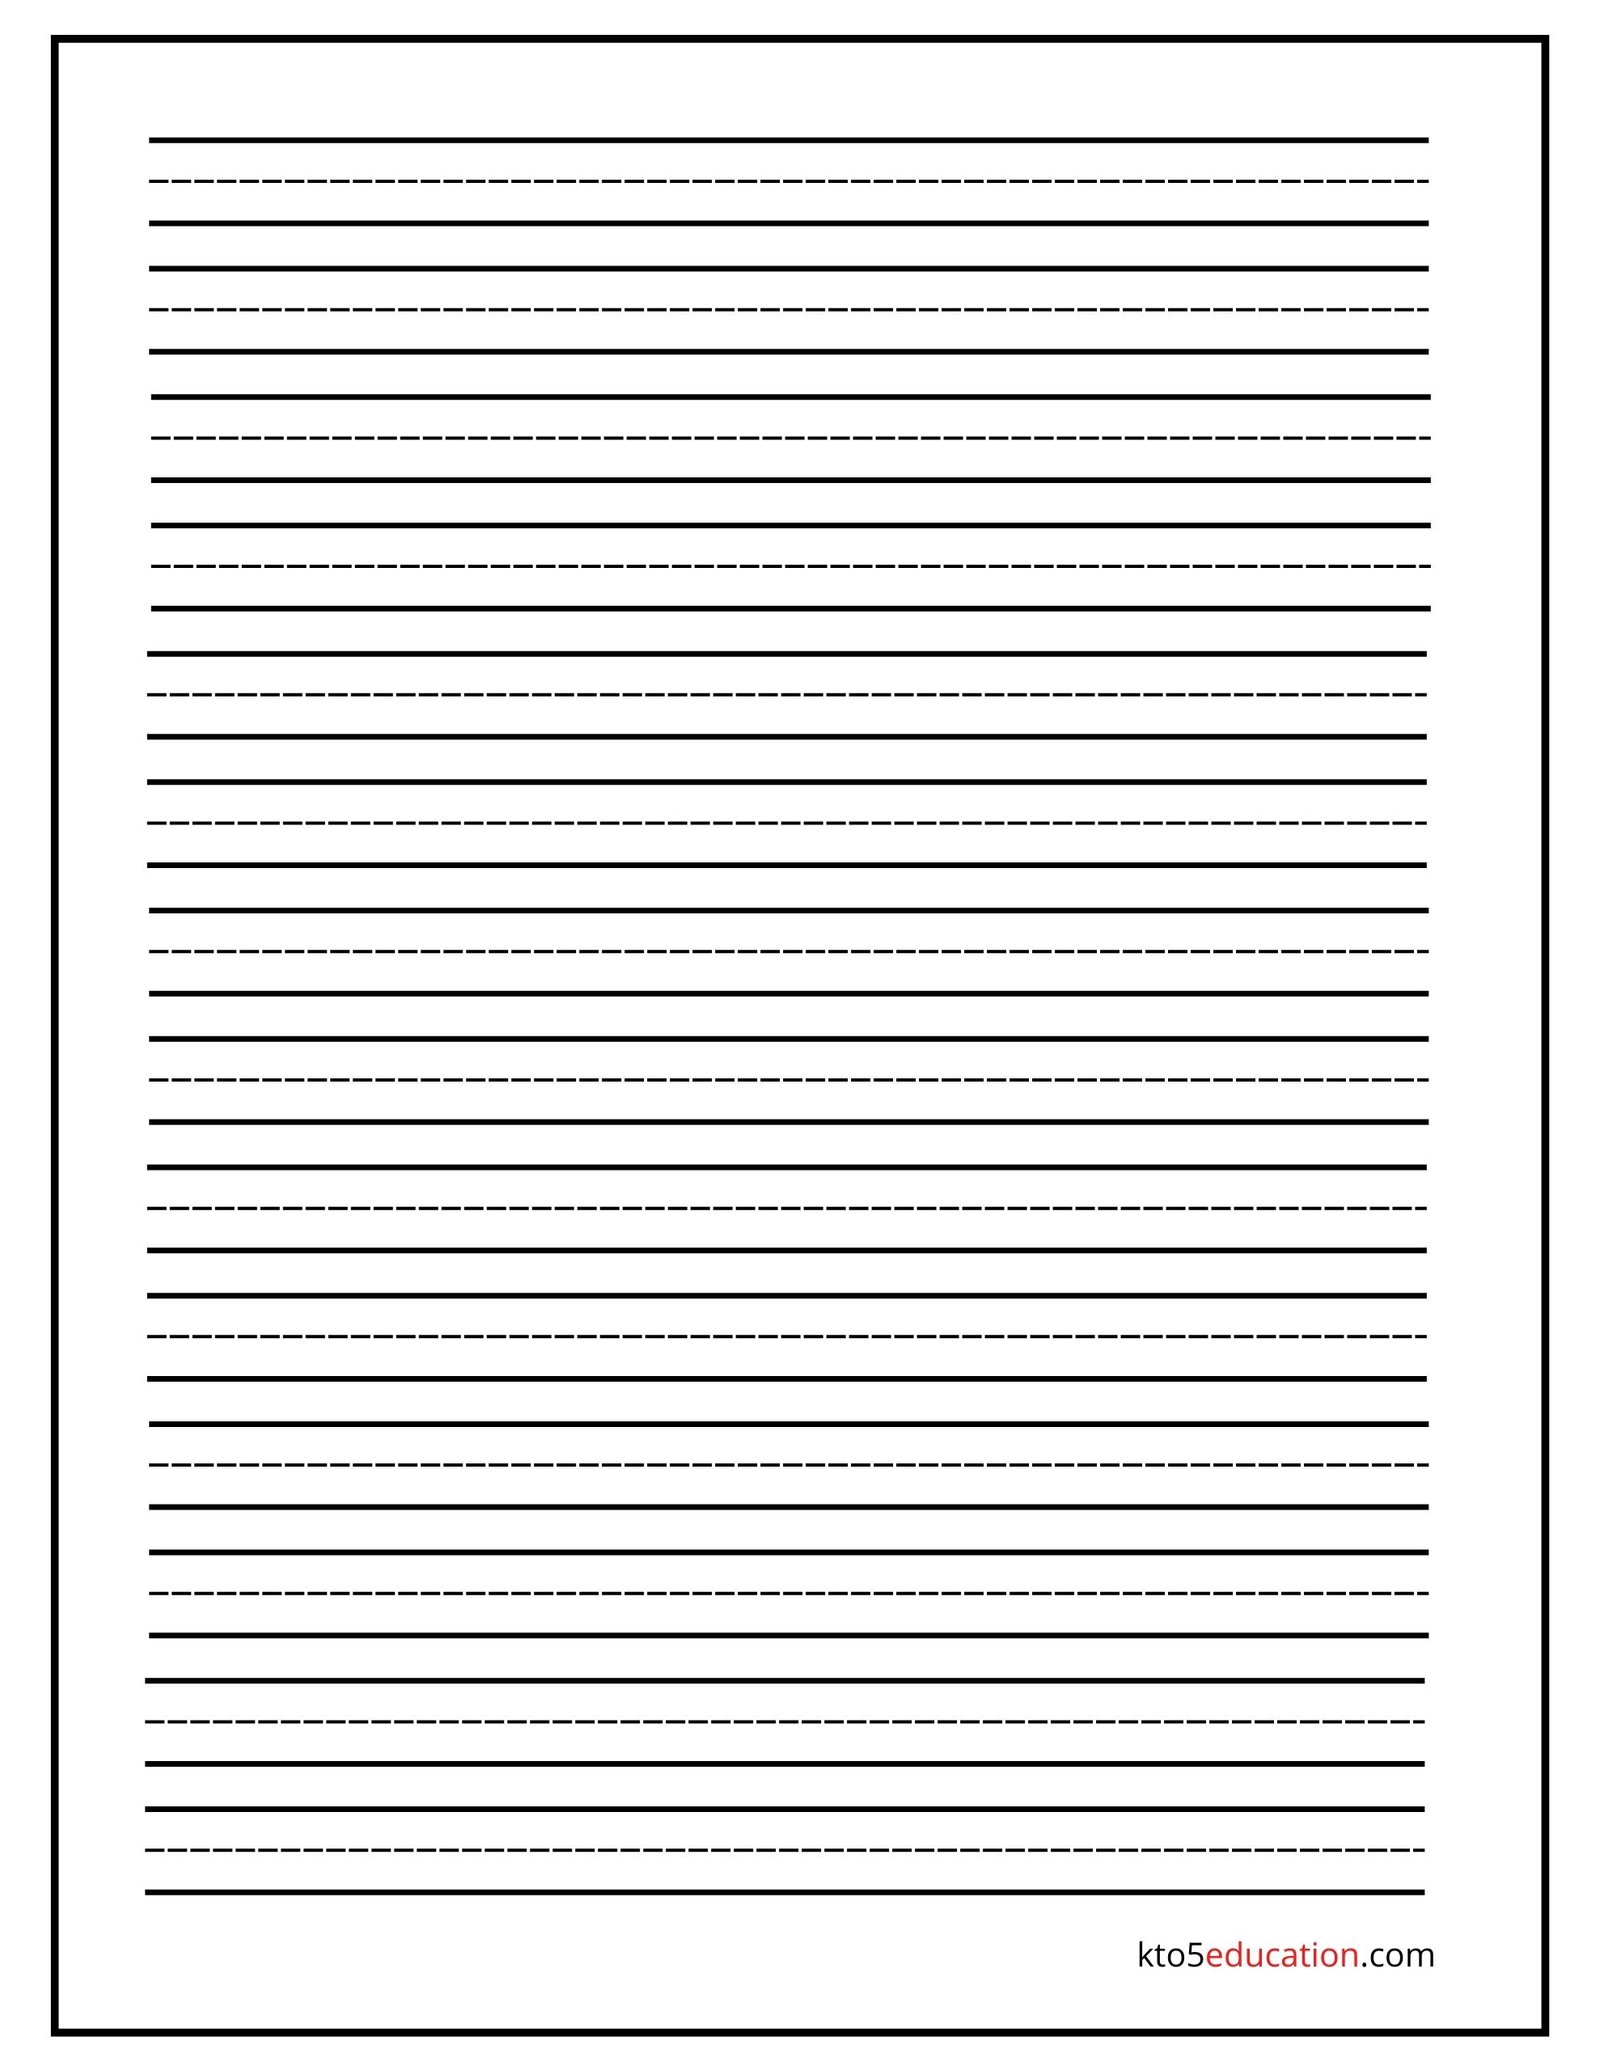 Blank Handwriting Paper Small For 1st Grade